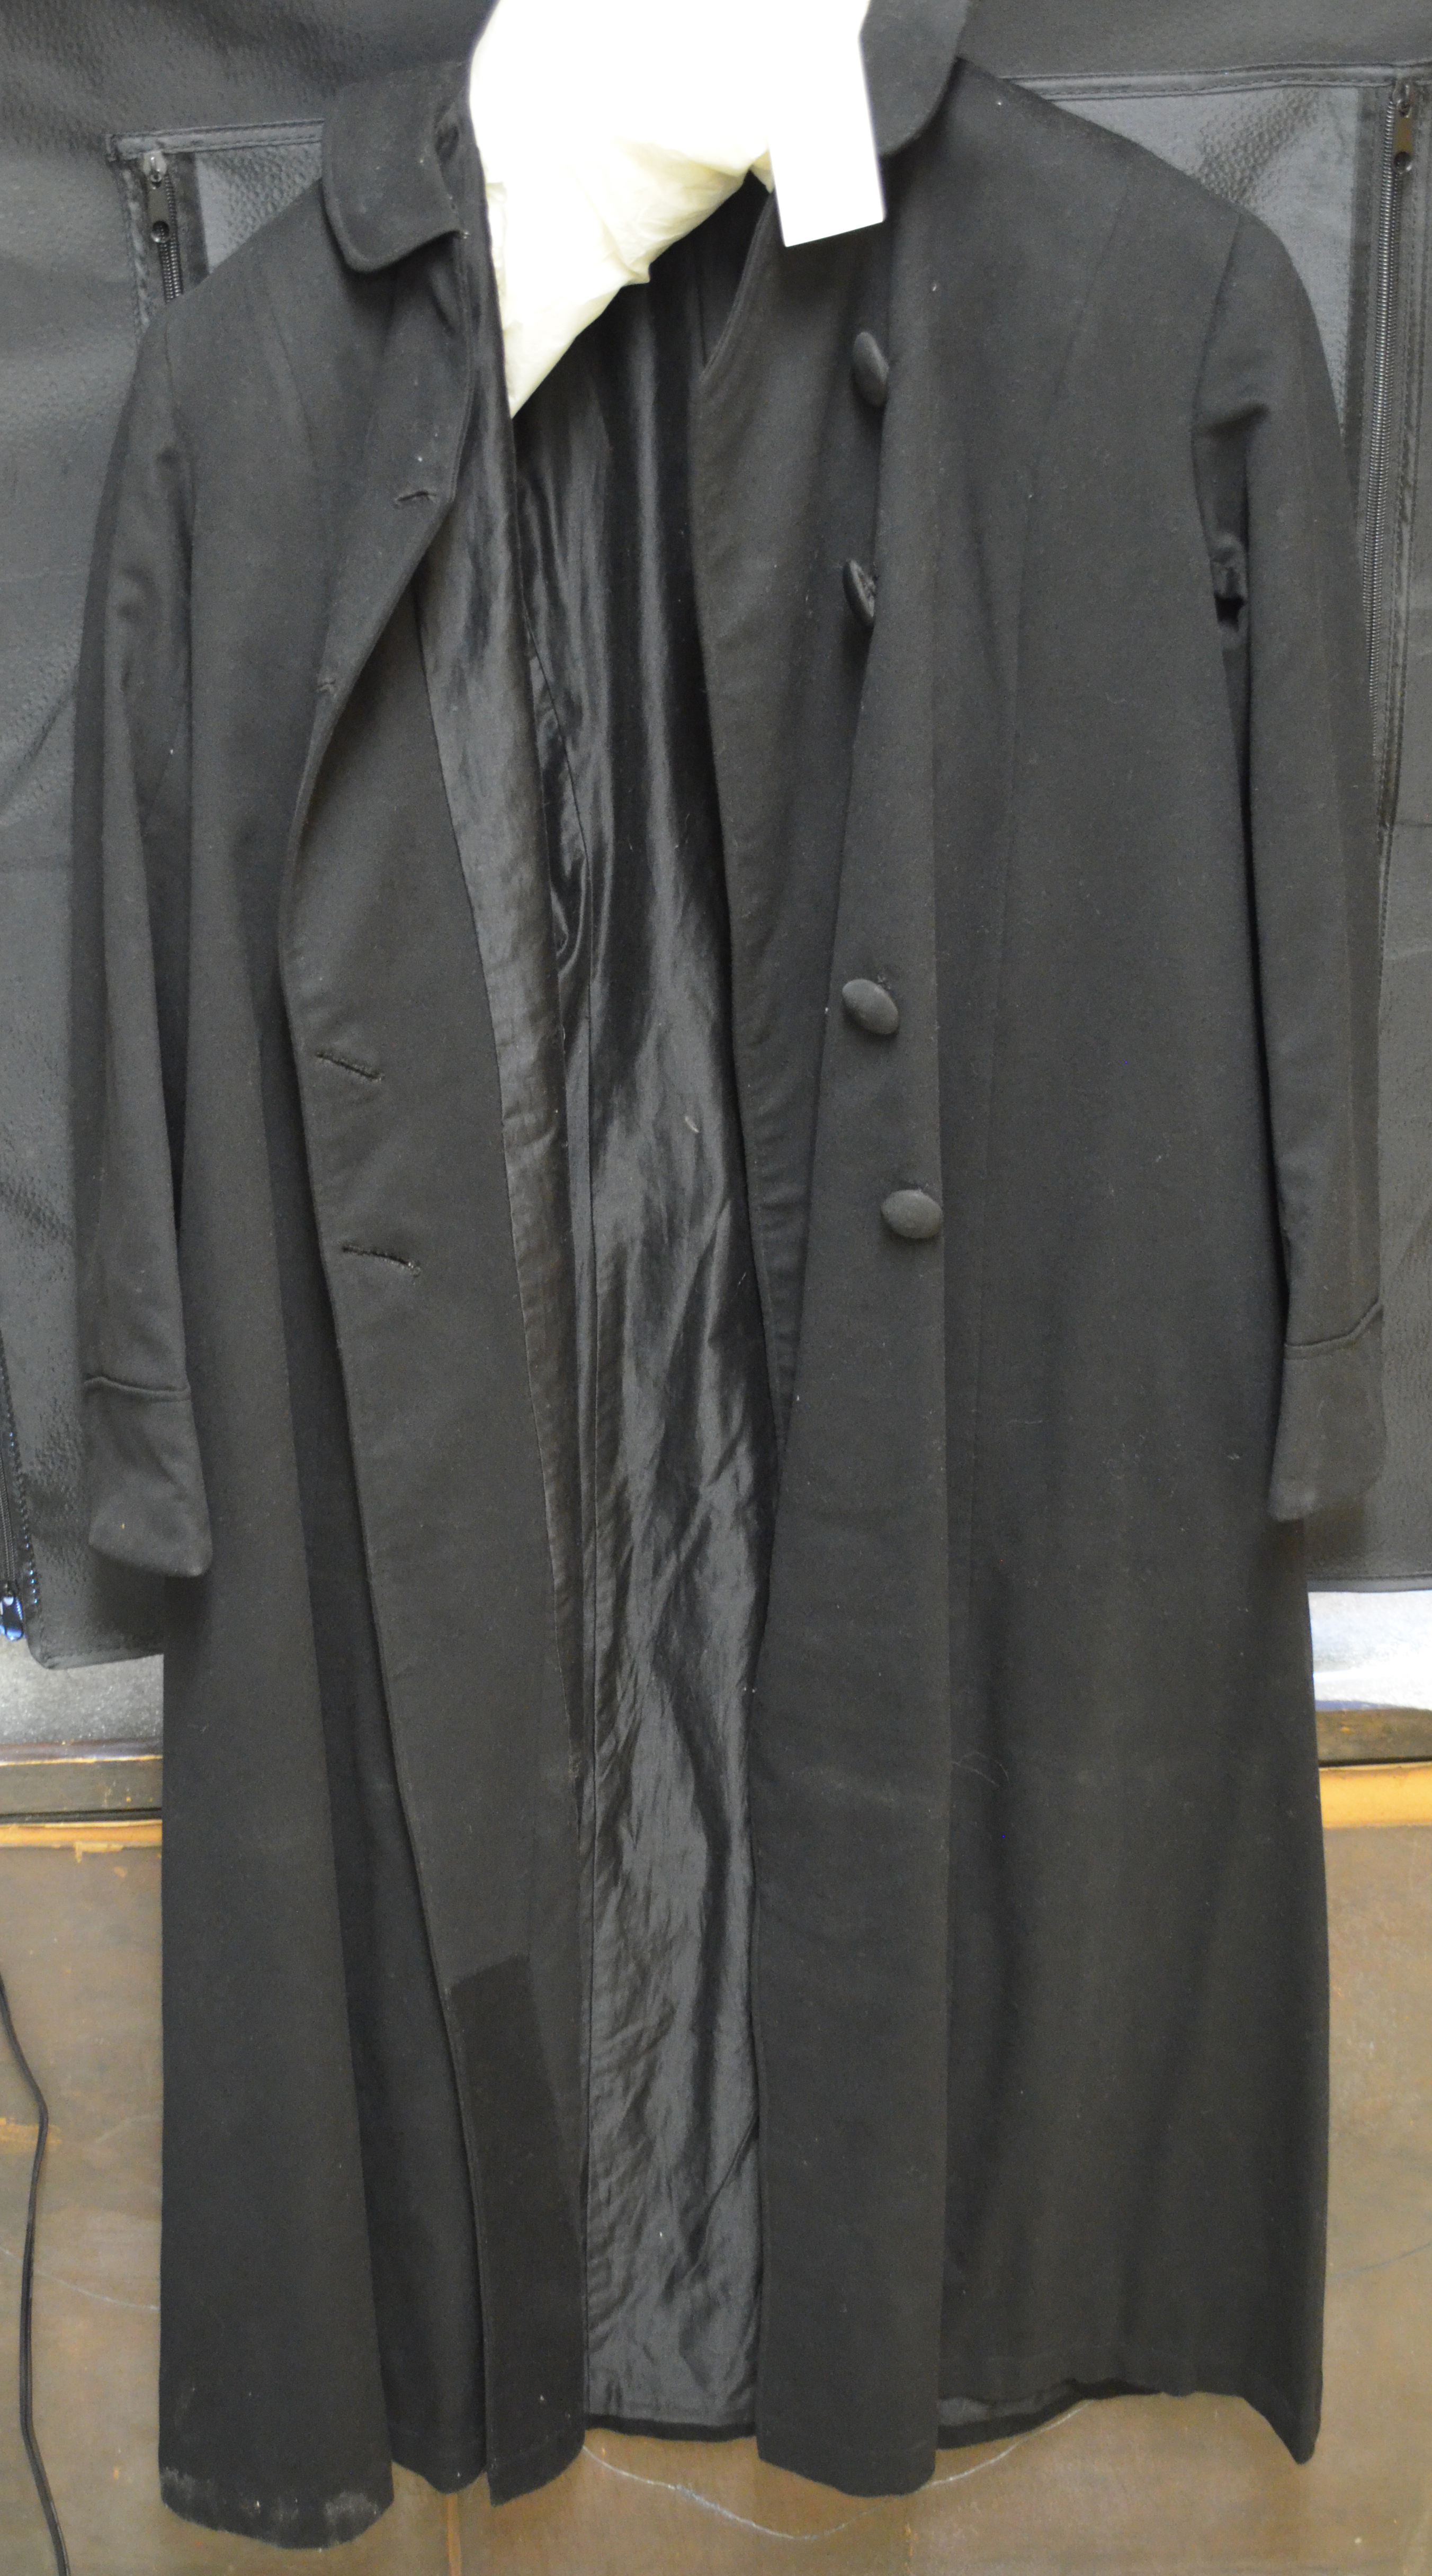 colour%20photo%20showing%20an%20overcoat